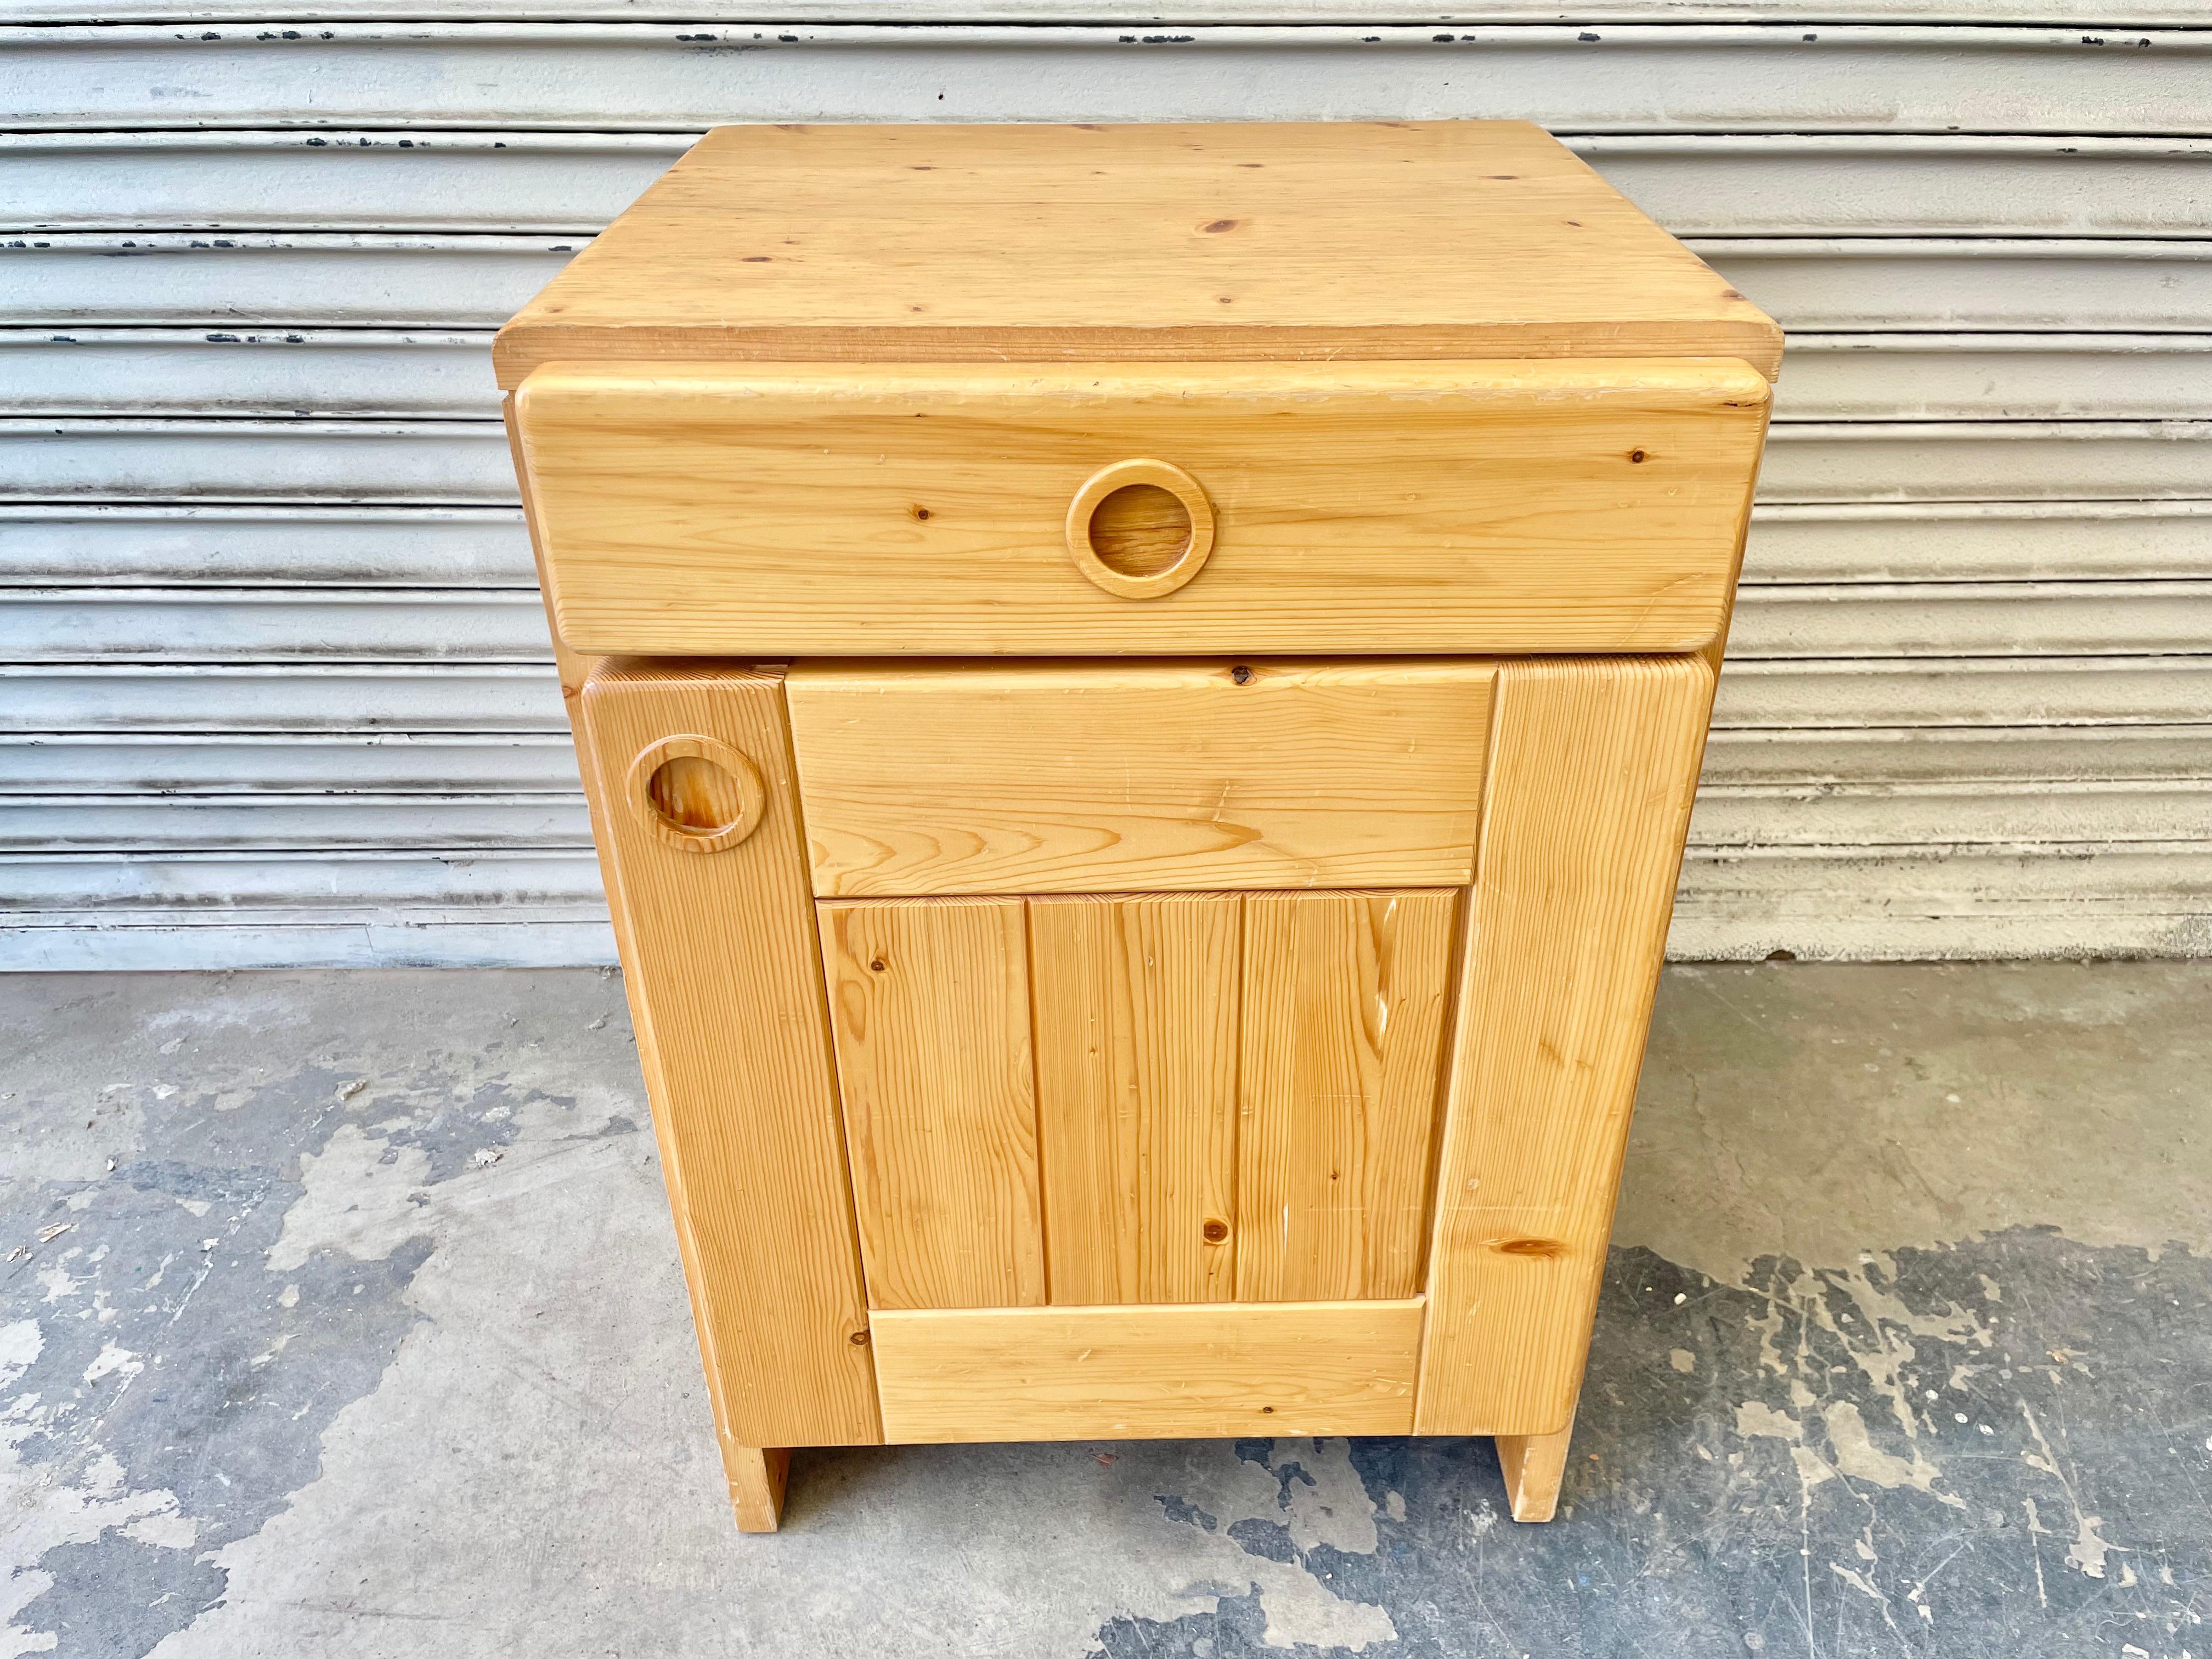 Pine bedside cupboard by Charlotte Perriand for Les Arcs. One pull out drawer. One door which opens to a shelf with two spaces for storage. Made of solid pine, circa 1960. Good original condition. Fun piece of collectible design from the popular